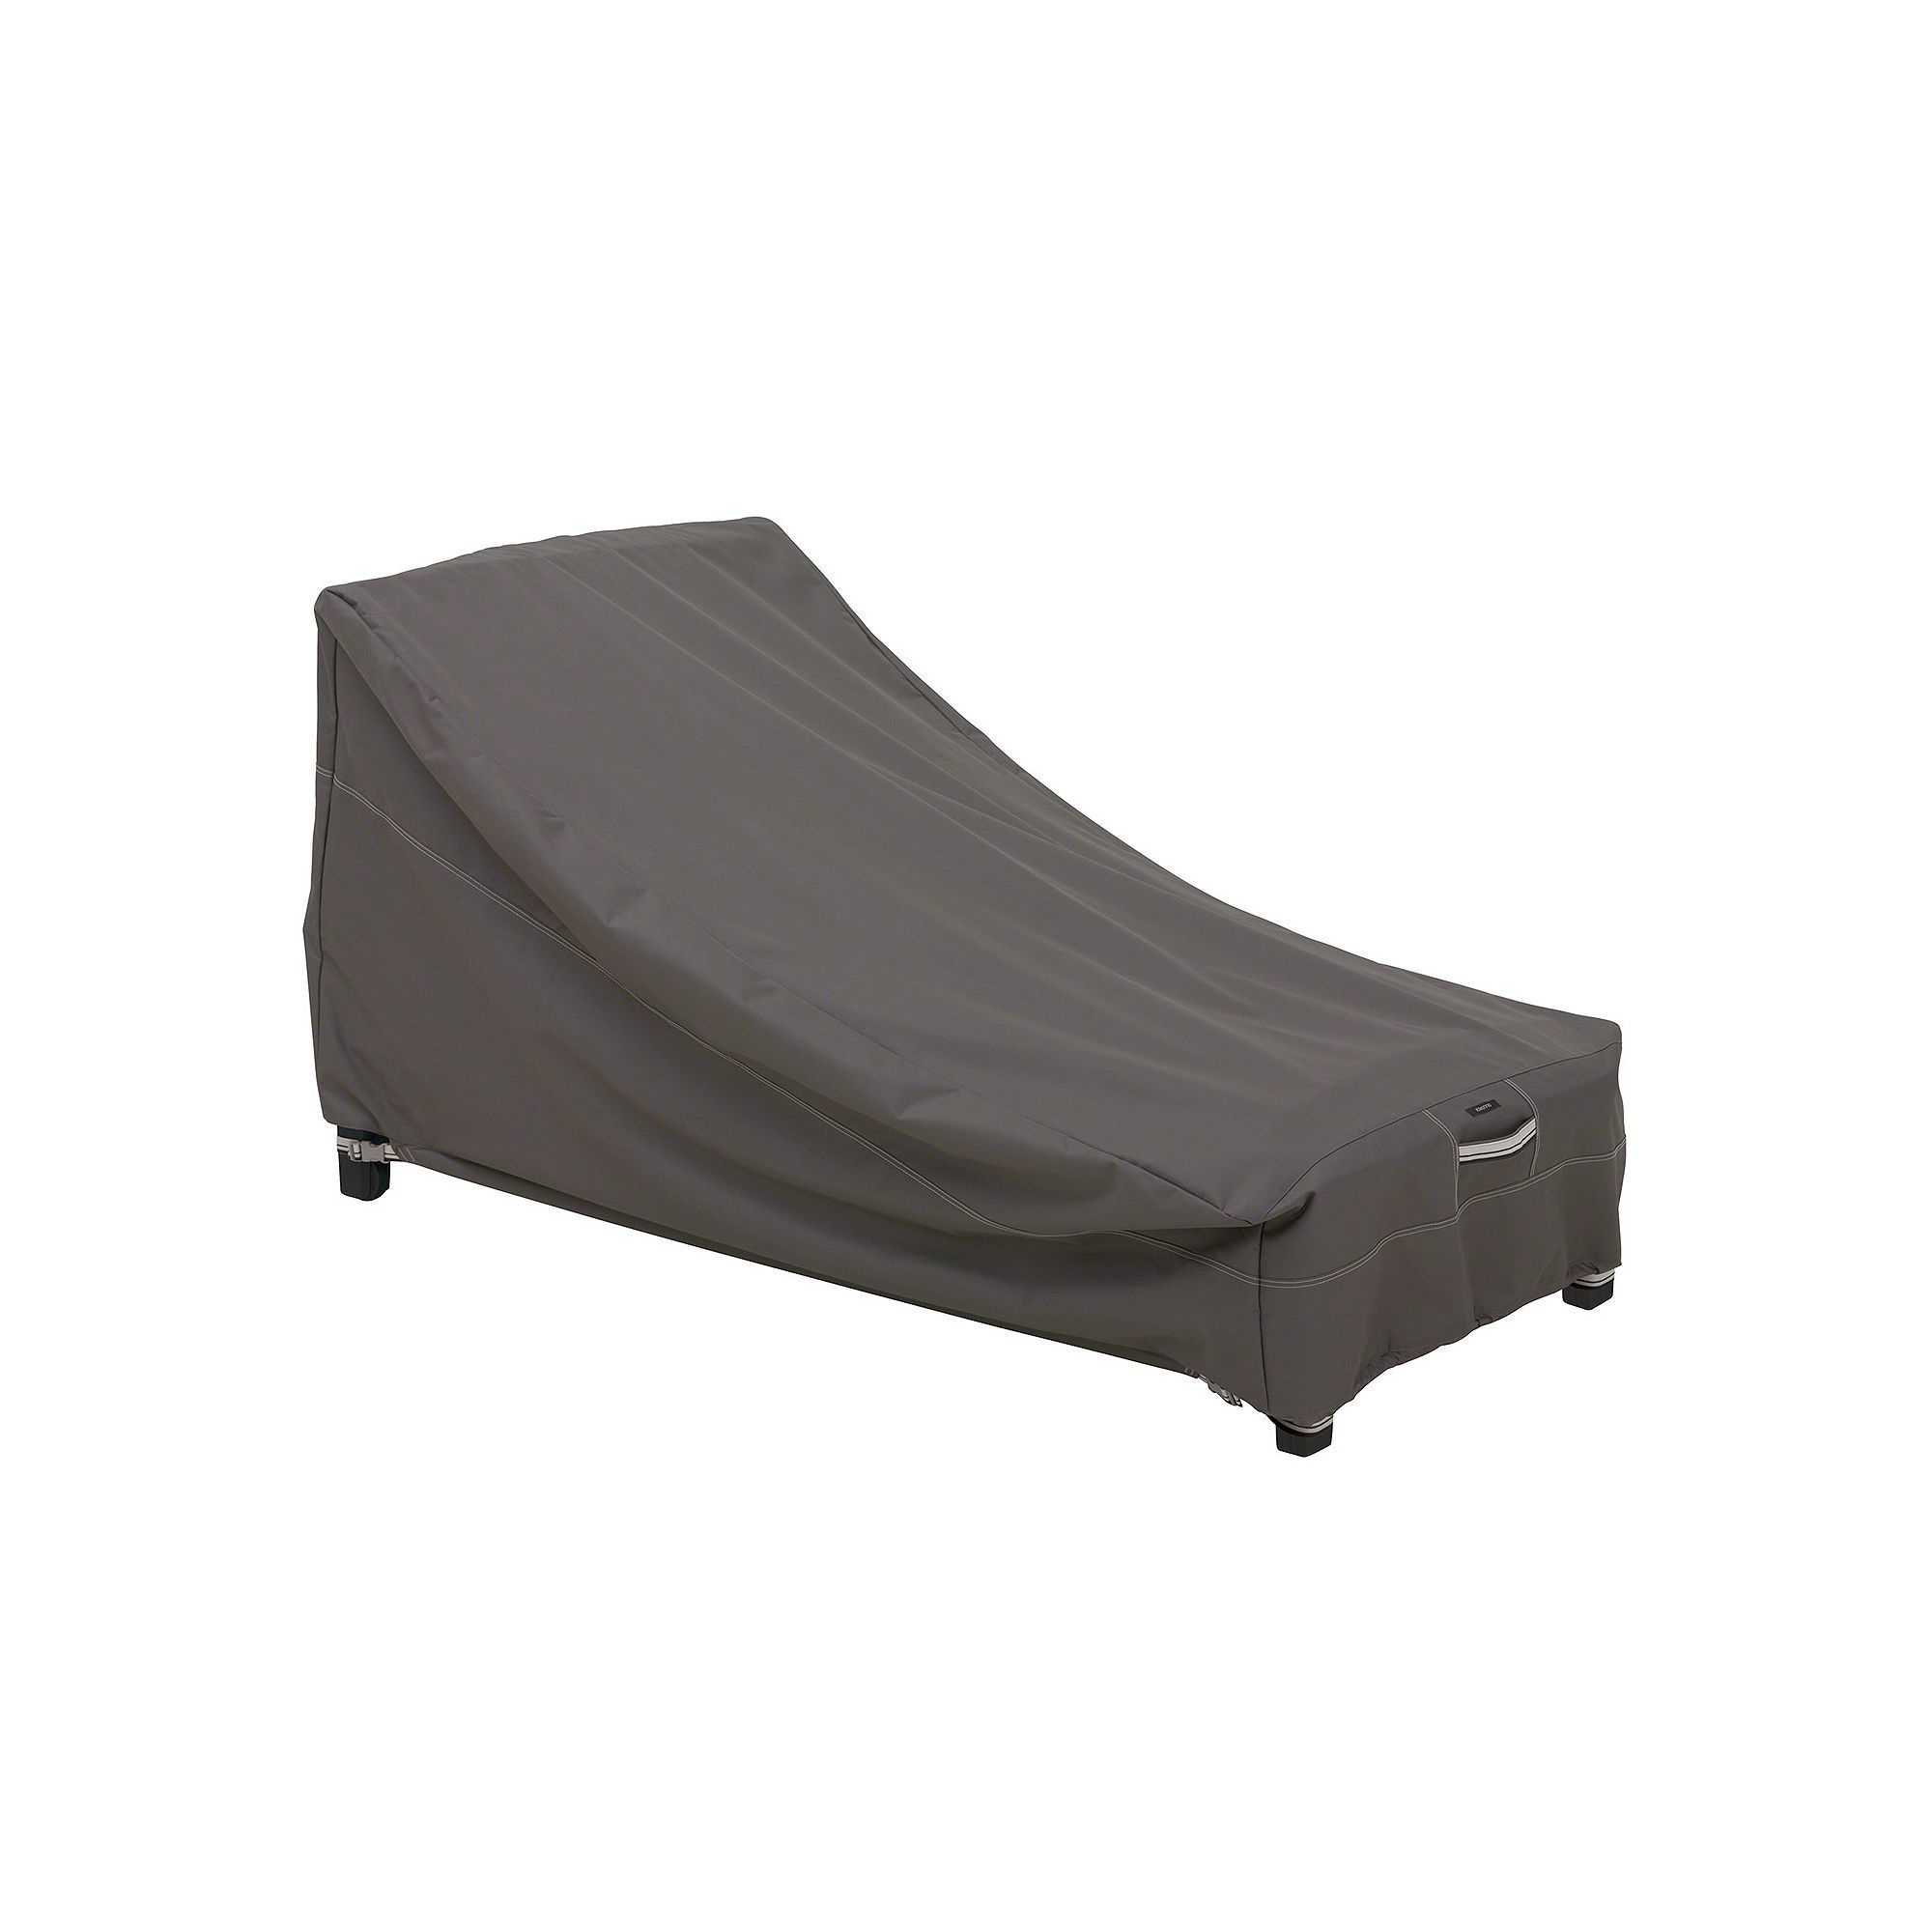 Classic Accessories Ravenna Chaise Cover Outdoor regarding sizing 2000 X 2000